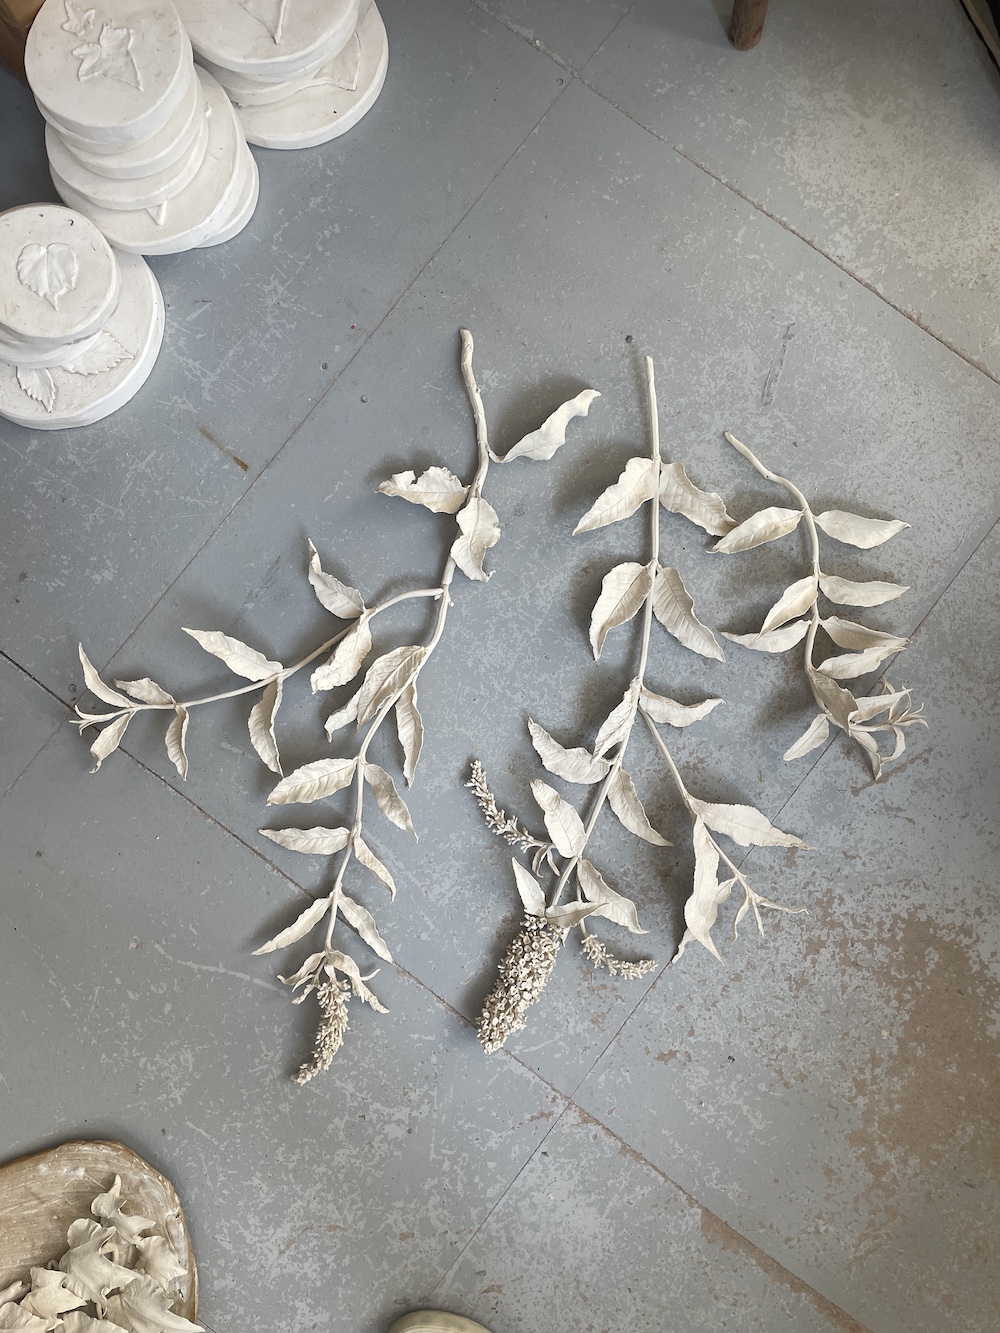 The Wick - Buddleia blooms in Kaori Tatebayashi's studio – fragments of her installation, Still Life, at Tristan Hoare before installation